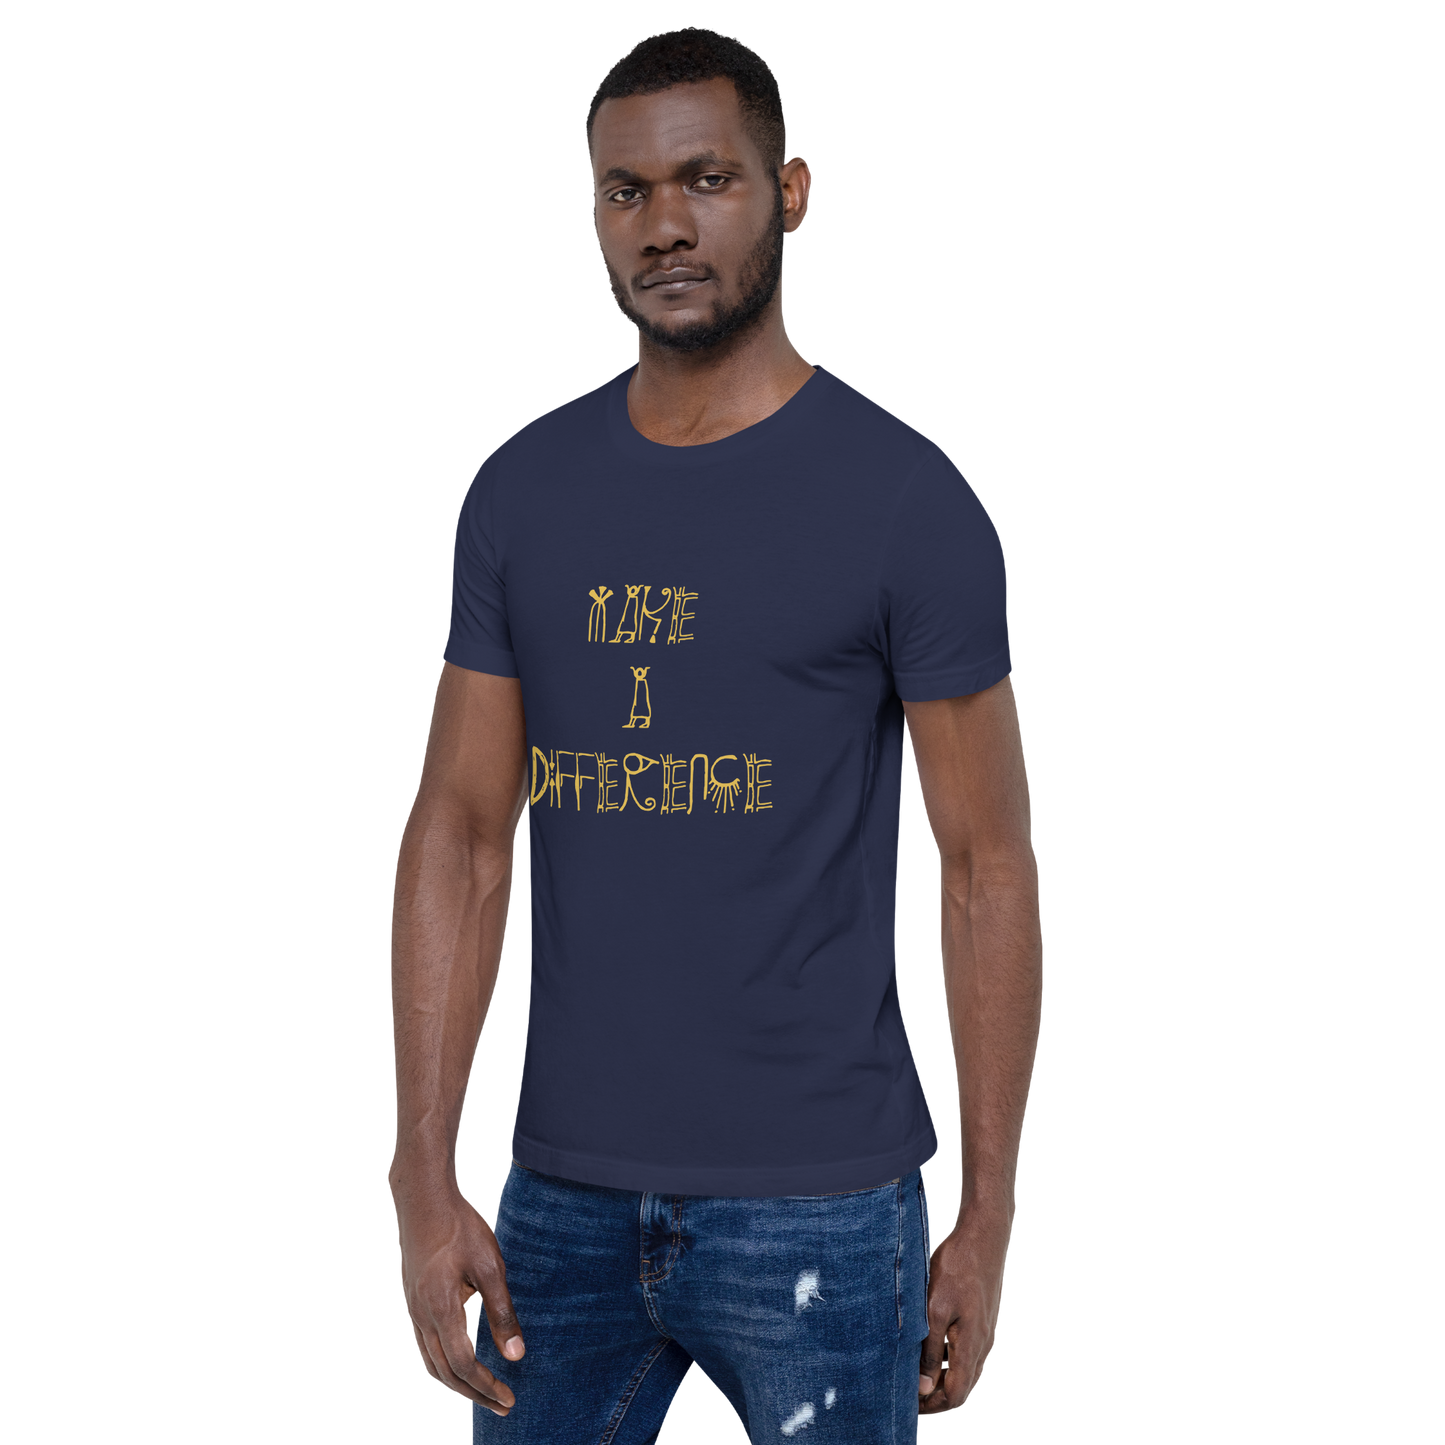 Short-Sleeve Make A Difference Unisex T-Shirt